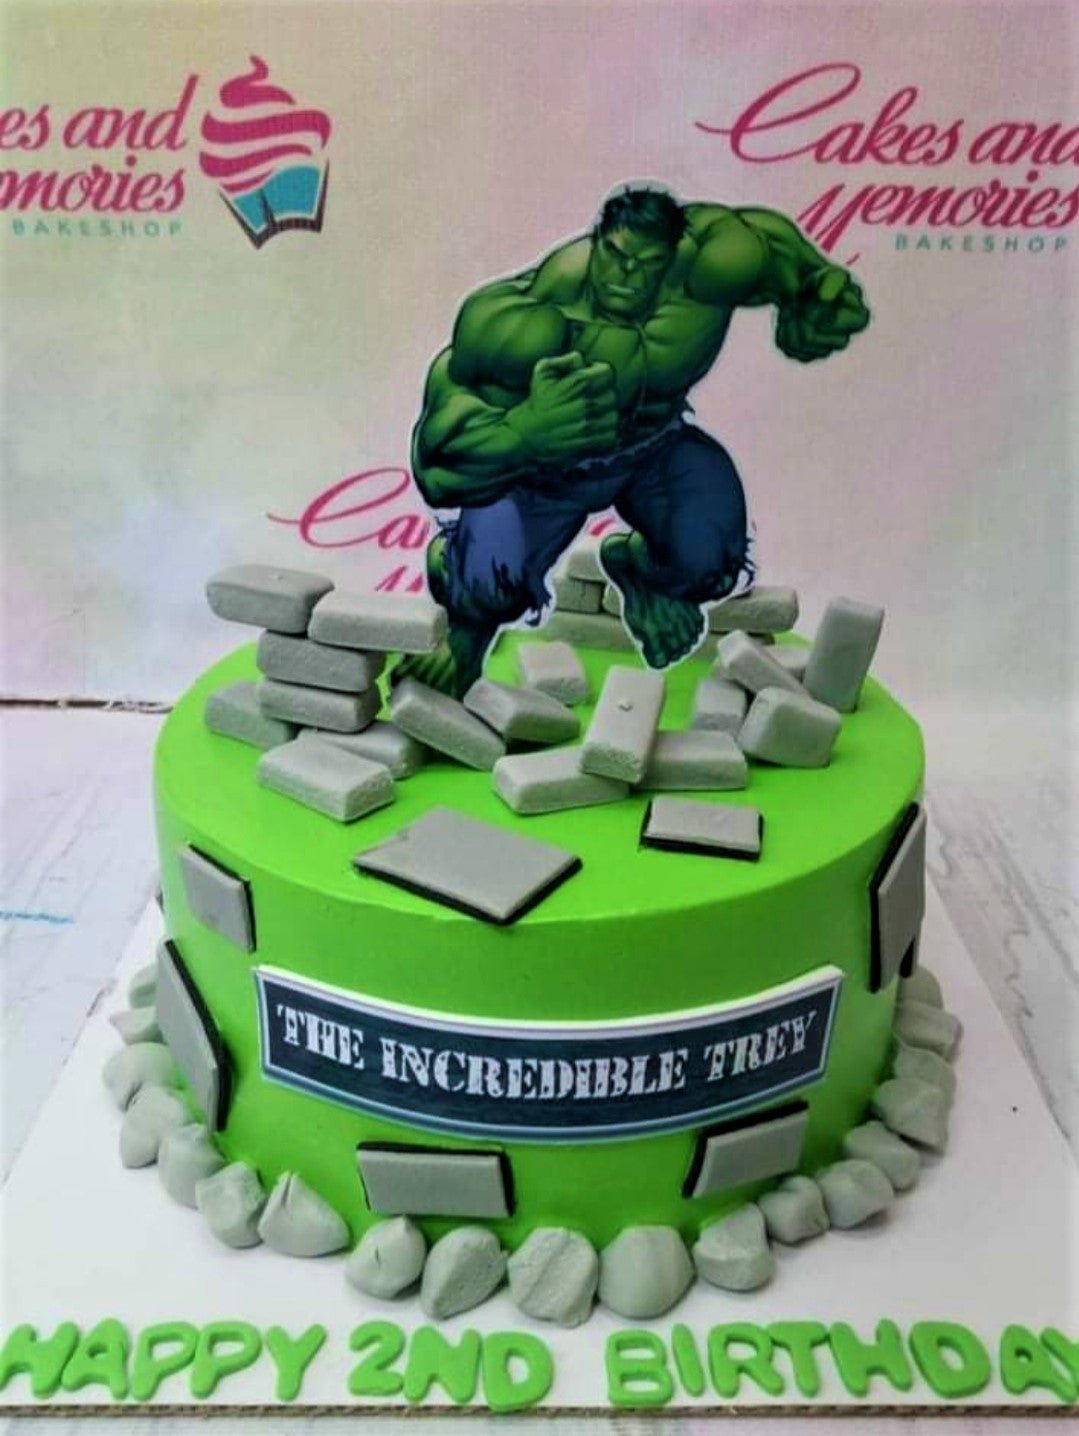 Avengers Cake - 1114 – Cakes and Memories Bakeshop